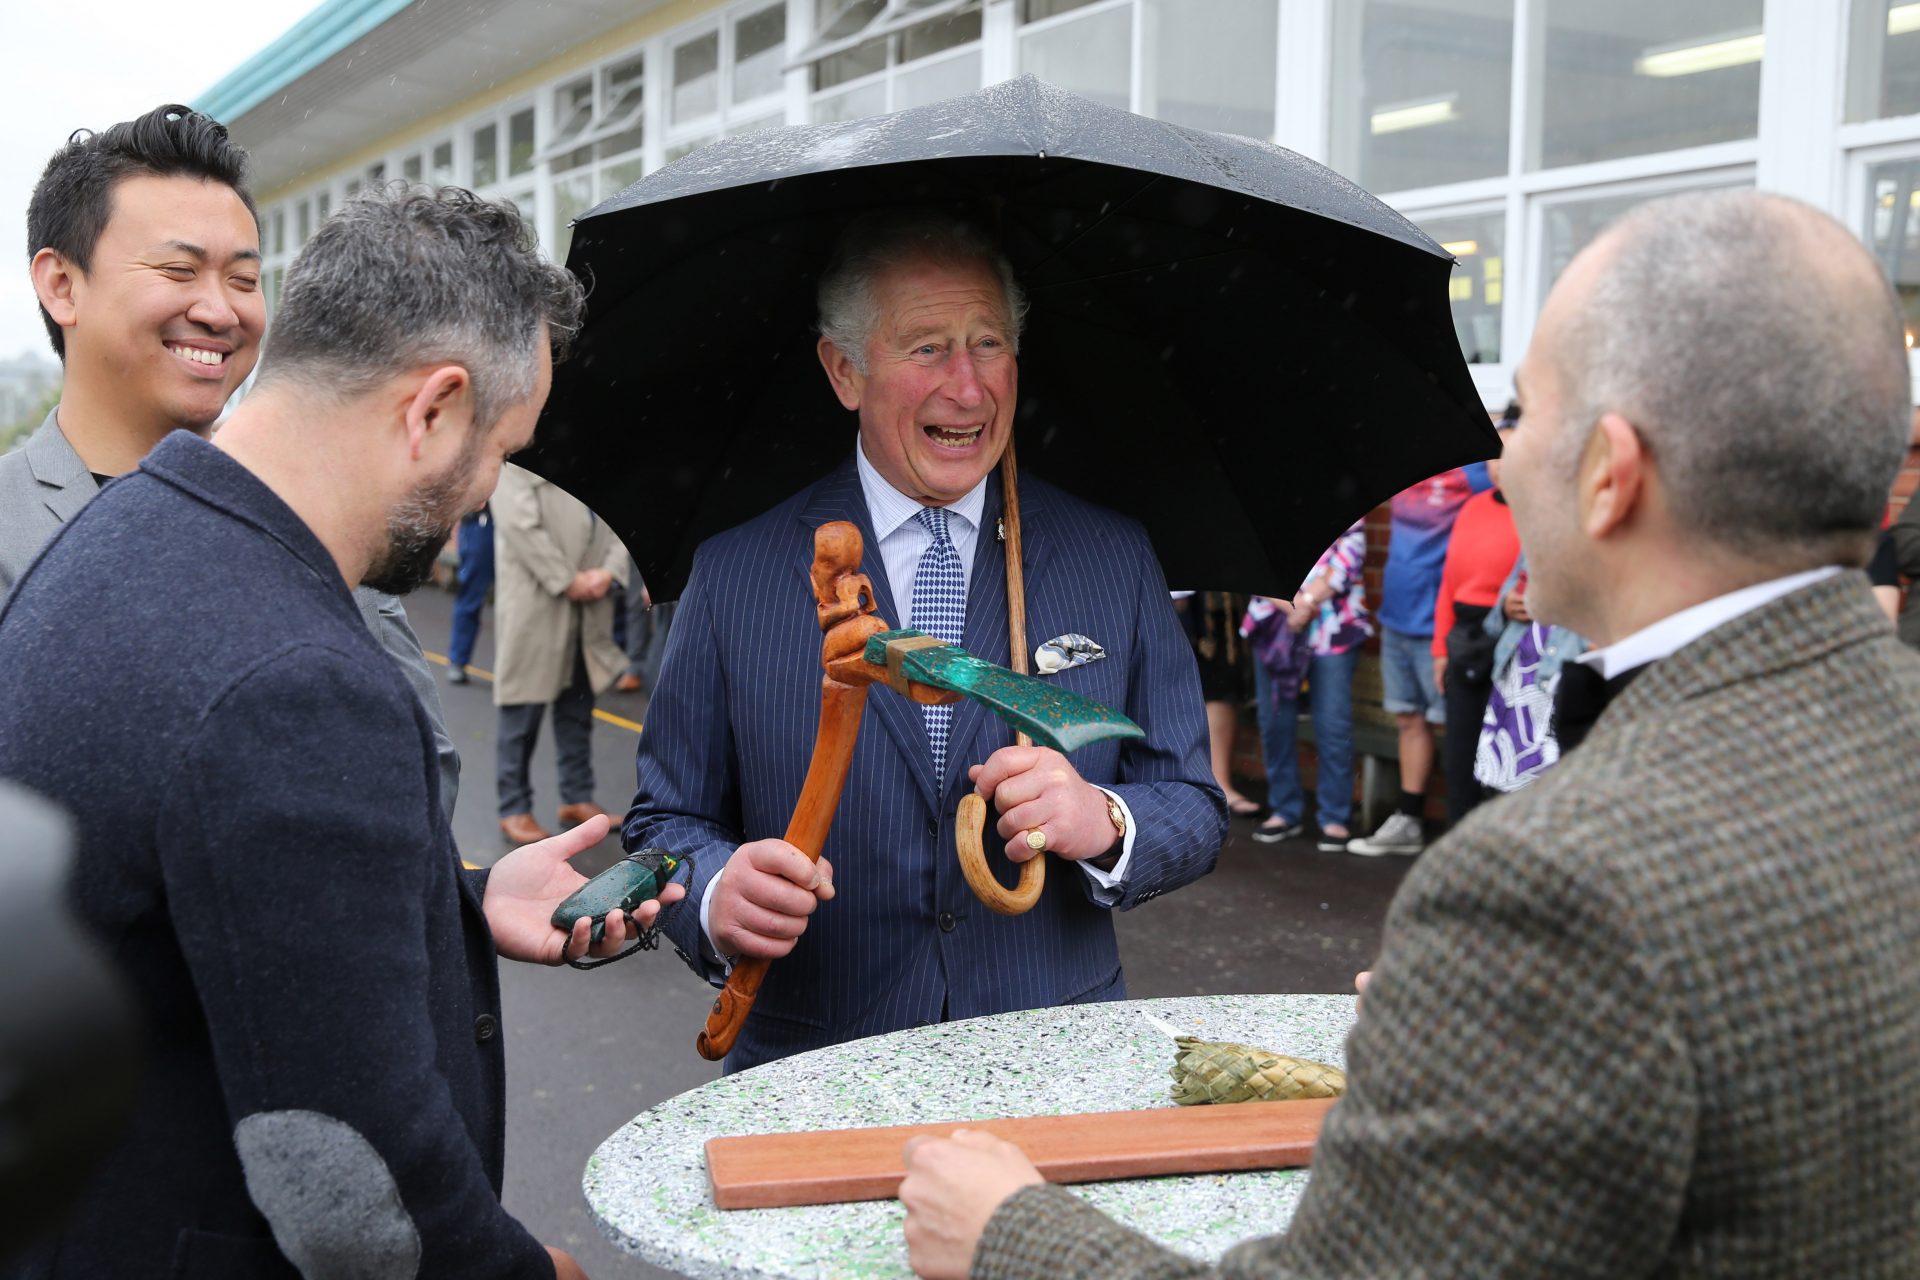 <p>Charles received a Maori axe at the Critical Design event in Auckland. He seemed quite pleased with it. Perhaps he can put it to good use now that he is King.</p>